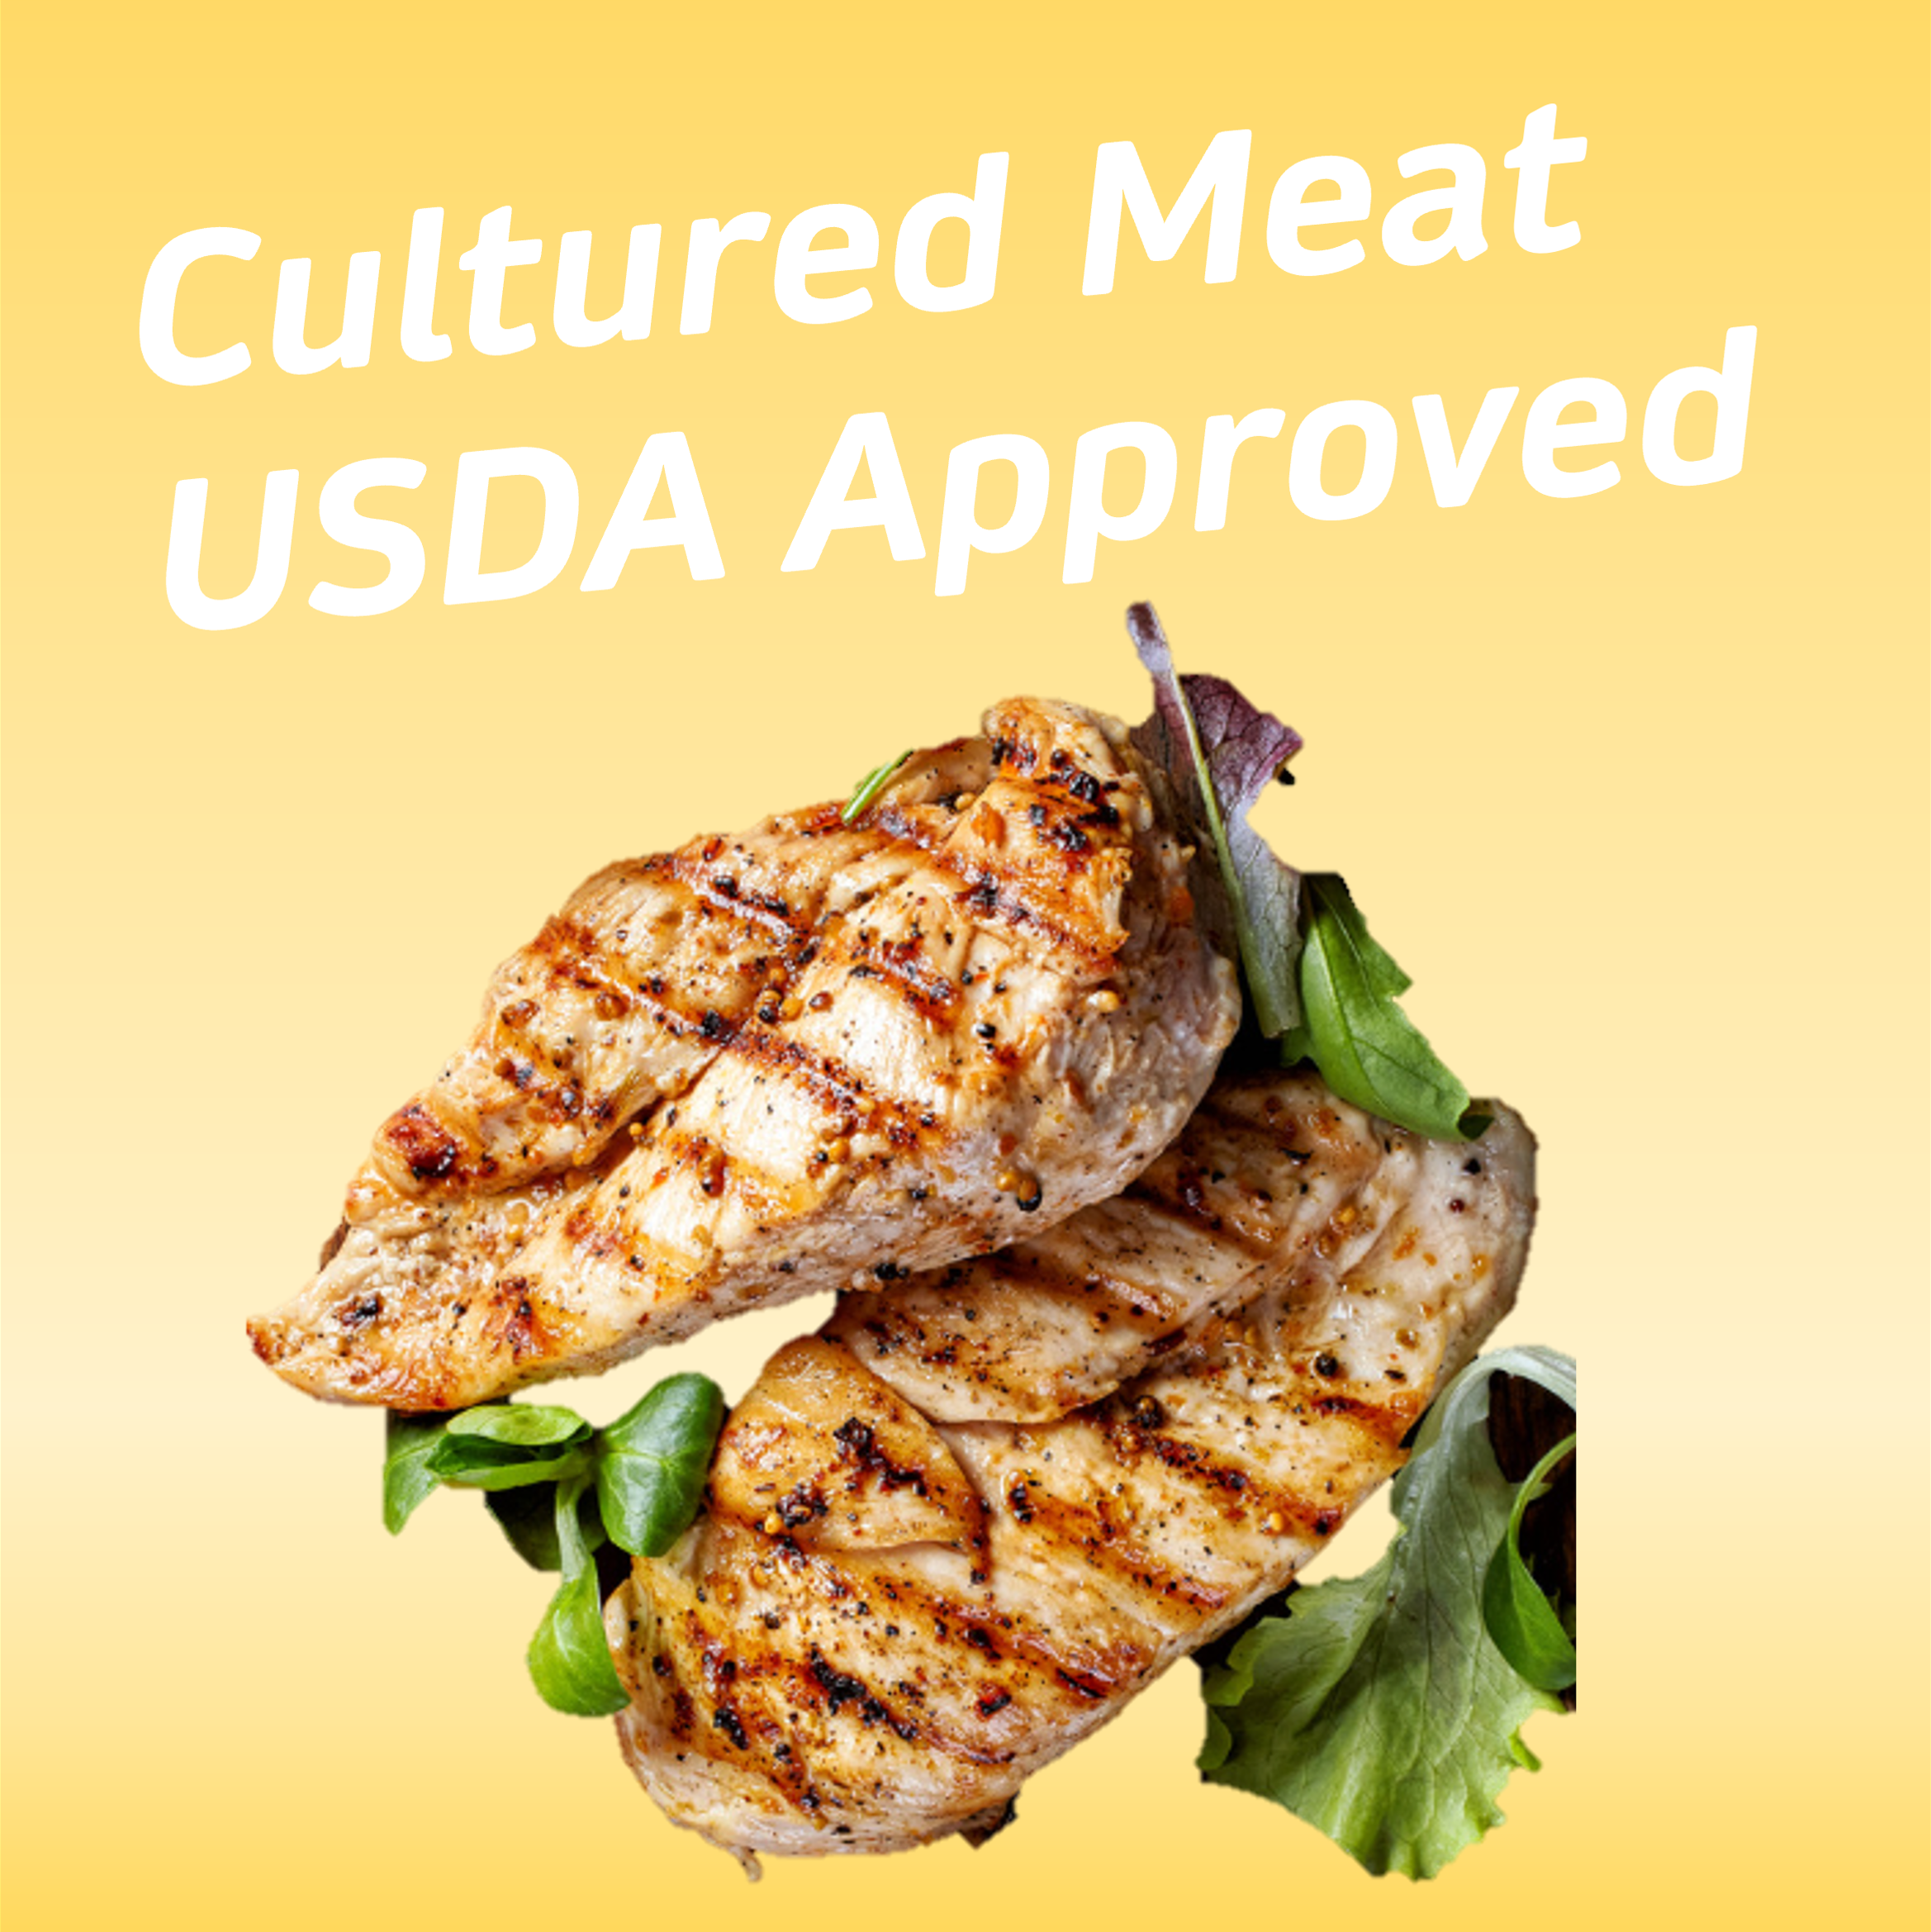 Cultured Meat Officially Approved for Sale in the US